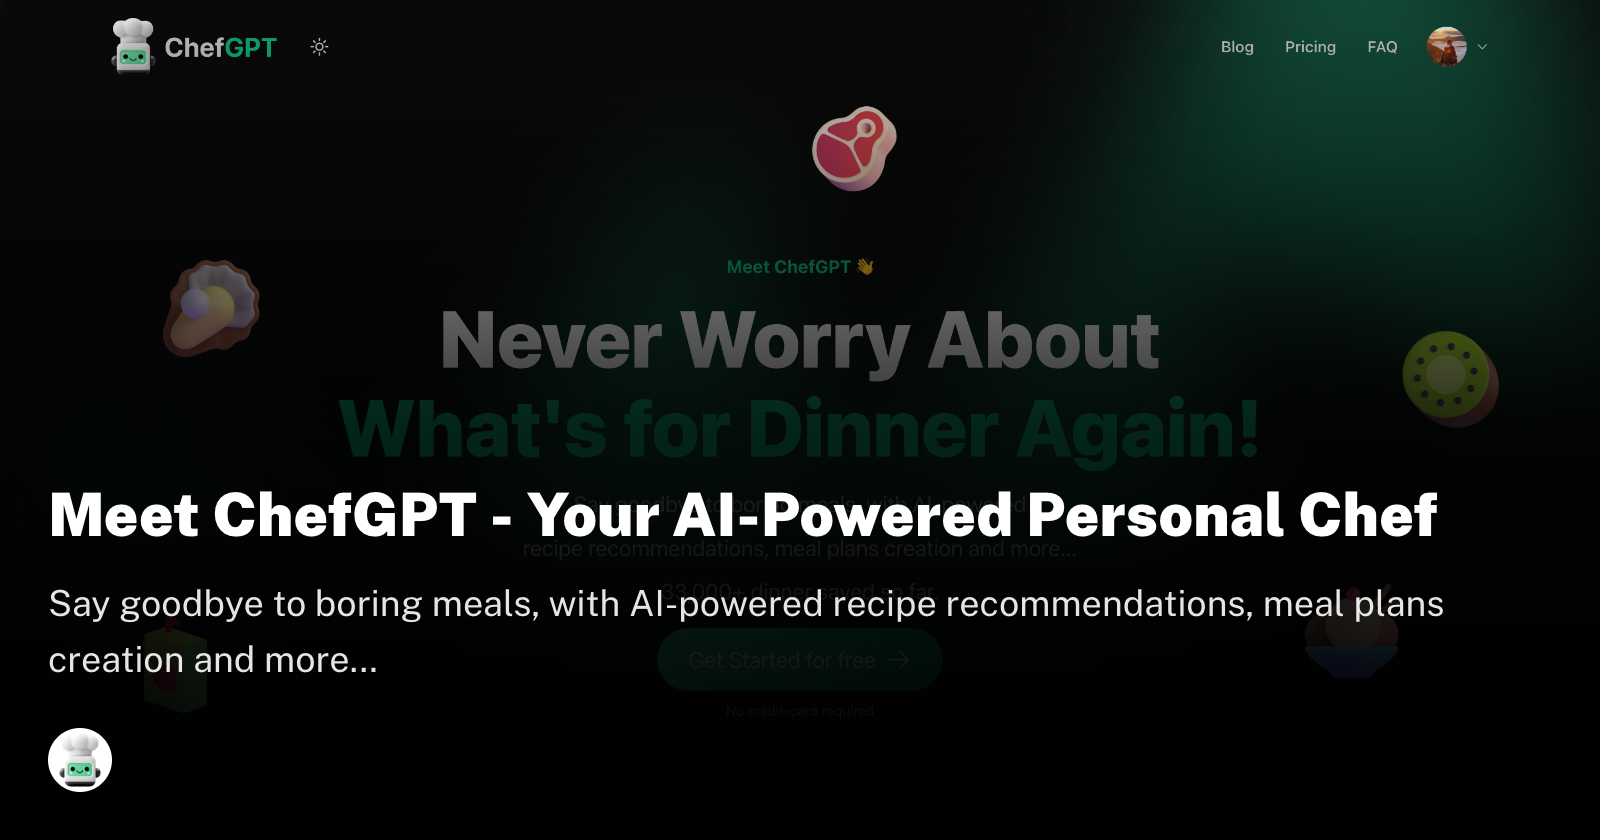 ChefGPT - Your AI-Powered Personal Chef